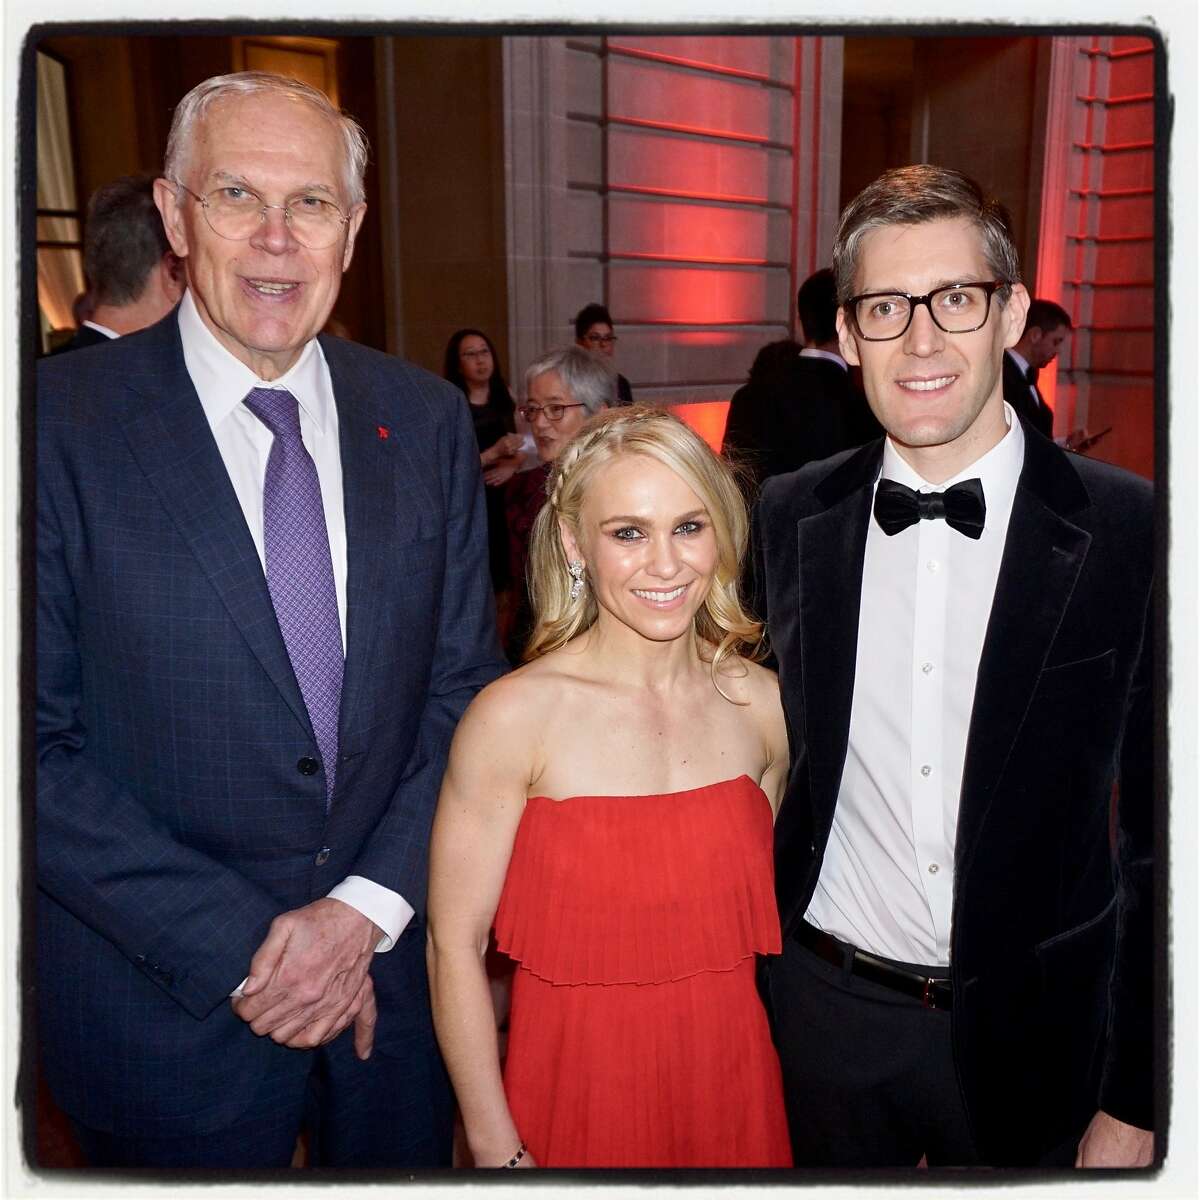 Knights Bridge vintner Jim Bailey (left) with Tatum and Alexander Getty at City Hall for the Red Cross Gala. March 17, 2018.